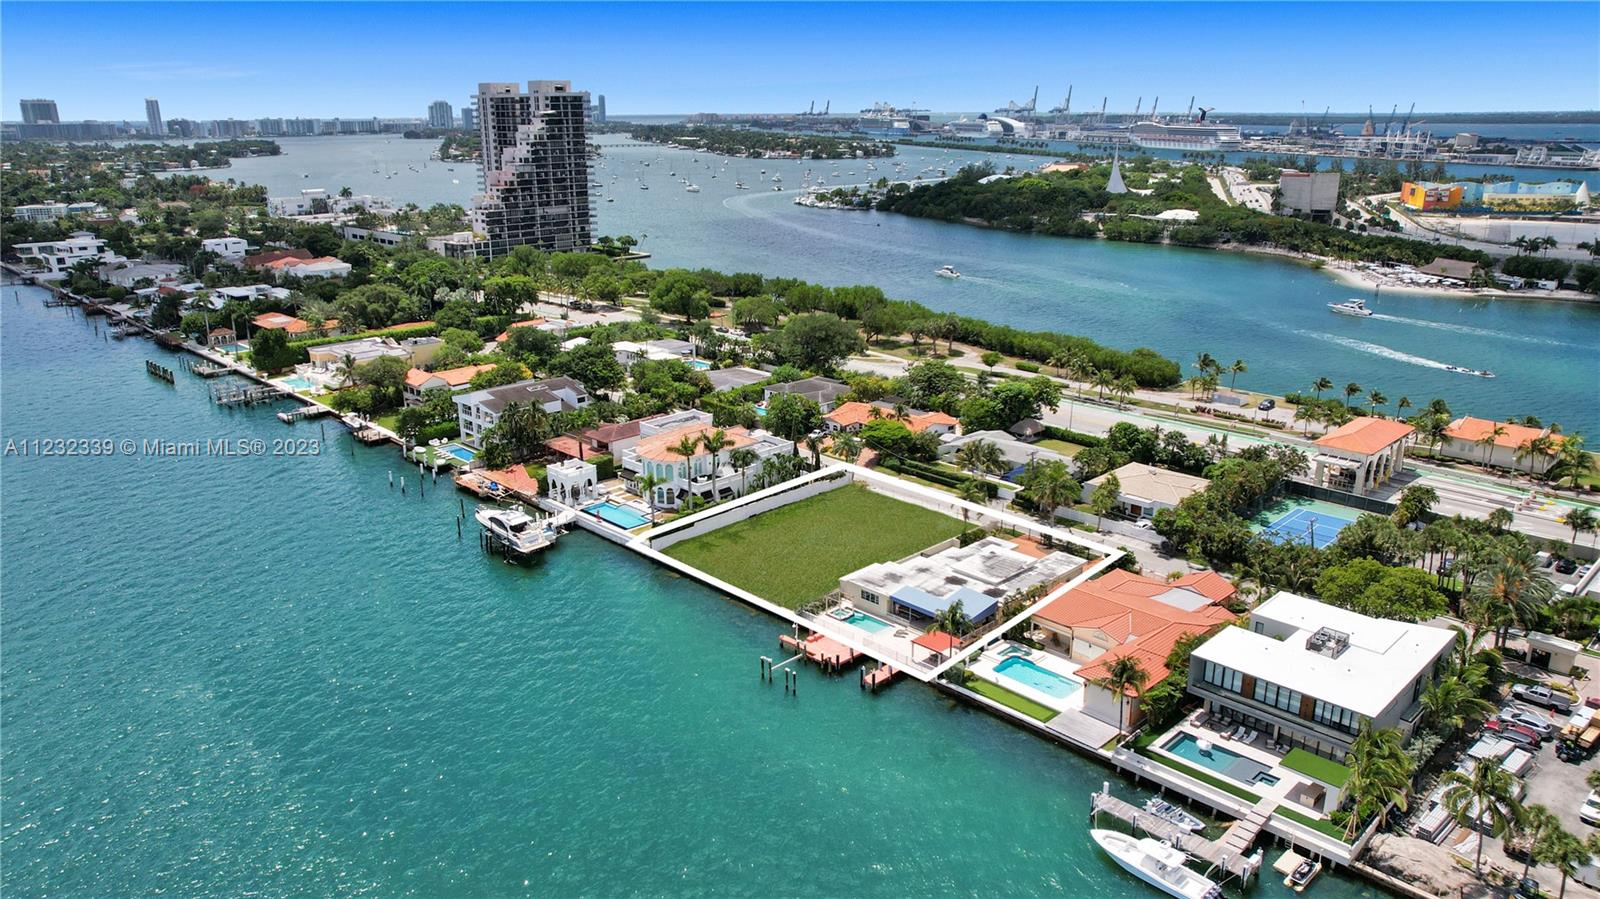 THE VENETIAN ISLANDS MASTER PIECE OPPORTUNITY OF YOUR LIFETIME. RARE OVERSIZED DOUBLE LOT/ ALMOST TRIPLE LOT WITH 26,250 SF & 175 FT ON THE WATER FOR YOUR YACHT.  WATCH INCREDIBLE UNOBSTRUCTED WIDE BAY WATER VIEWS WITH FABULOUS SUNRISE AND SUNSET VIEWS OVER MIAMI MAKES THIS THE PERFECT WATERFRONT LIVING EXPERIENCE. LIVE IN PARADISE STEPS AWAY FROM WYNWOOD EDGEWATER AND SOUTH BEACH. DESIGN YOUR DREAM HOME WITH PLANS OF THE WORLD RENOWNED ARCHITECT KOBI KARP.